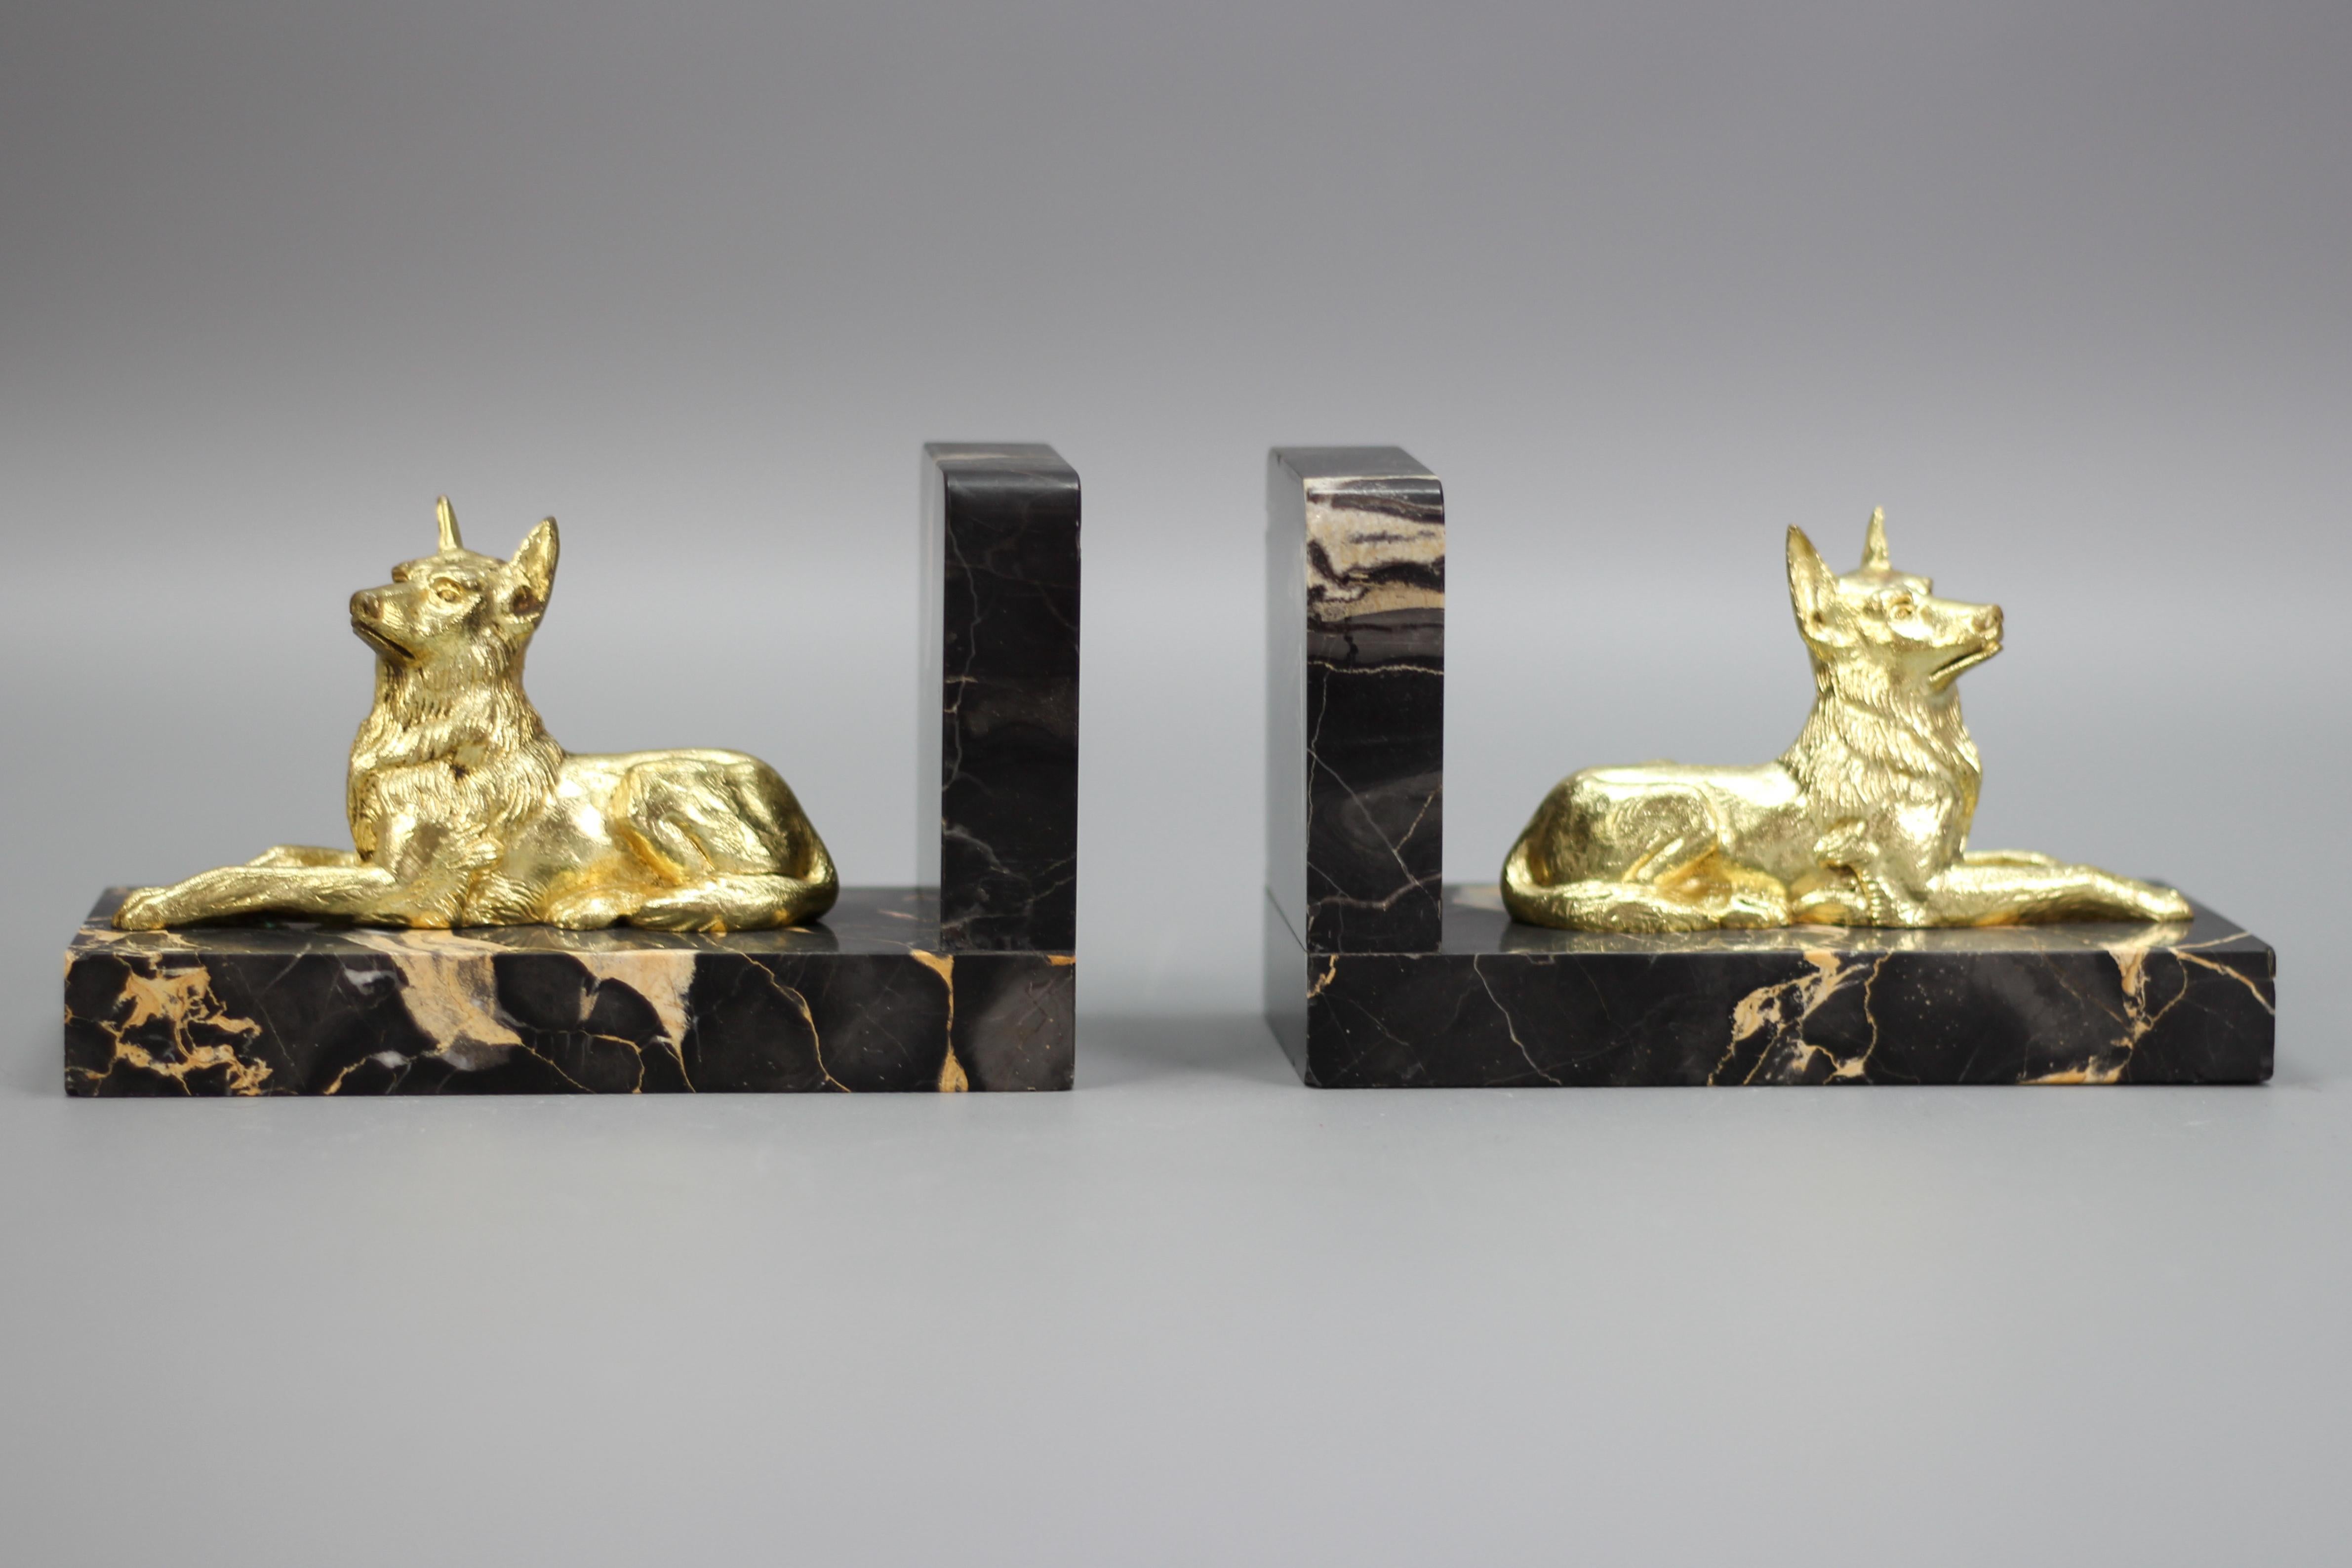 French Art Deco gilt bronze German shepherd dog and black marble bookends.
This beautiful pair of bookends features gilt bronze German shepherd dog figures mounted on black marble bases. France, circa the 1930s.
Dimensions: height: 11 cm / 4.33 in;